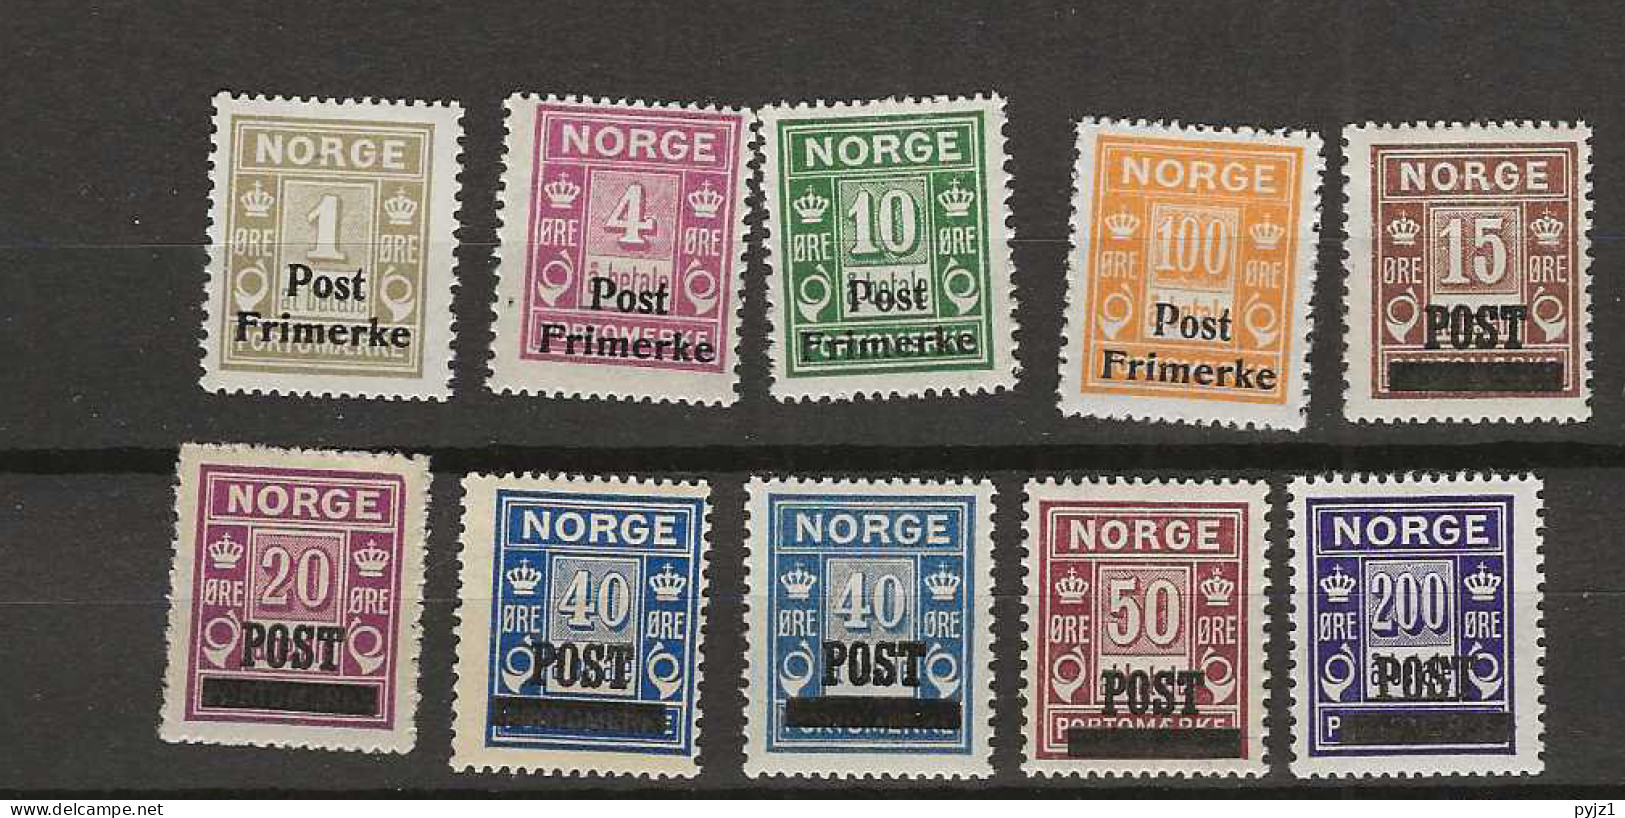 1929 MNH Norway Mi 141-149 (20 Ore Is MH/*) Including Both Shades Of 40 Ore - Ongebruikt